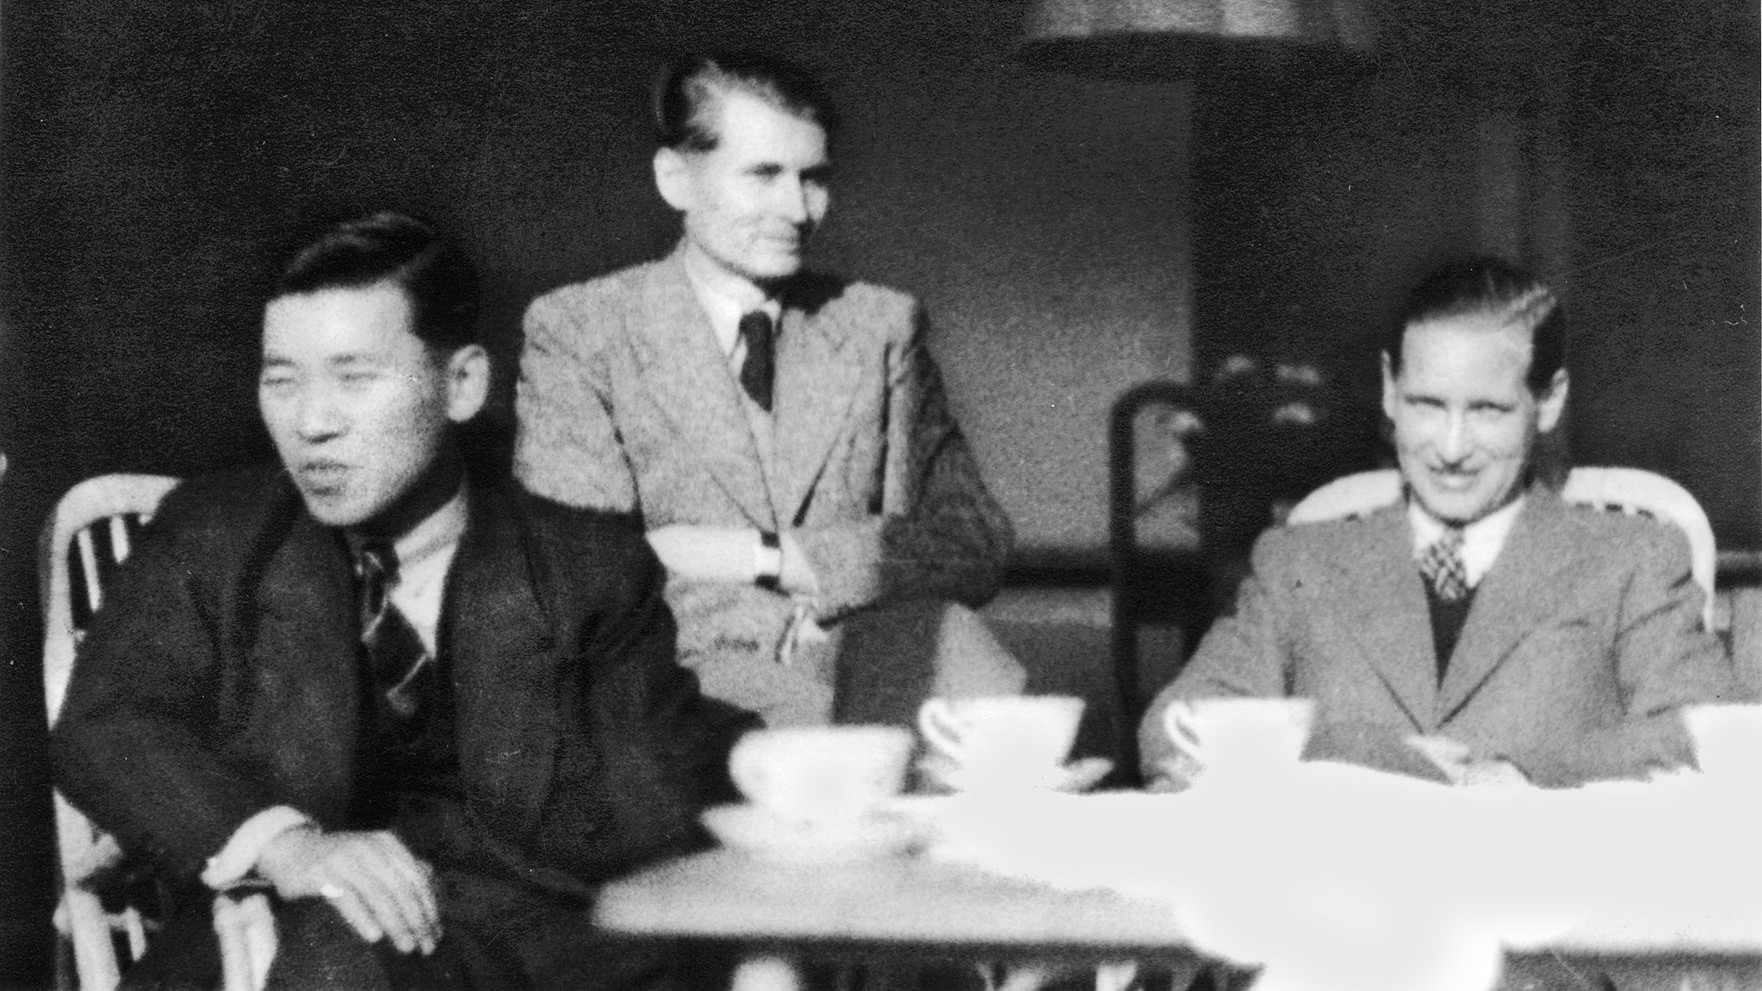 Erwin Wickert (center), with, from left, Shinzaku Hogen, a future Japanese ambassador to Vienna, according to Wickert, and Adam Vollhard, who wrote for the German News Agency in Tokyo.